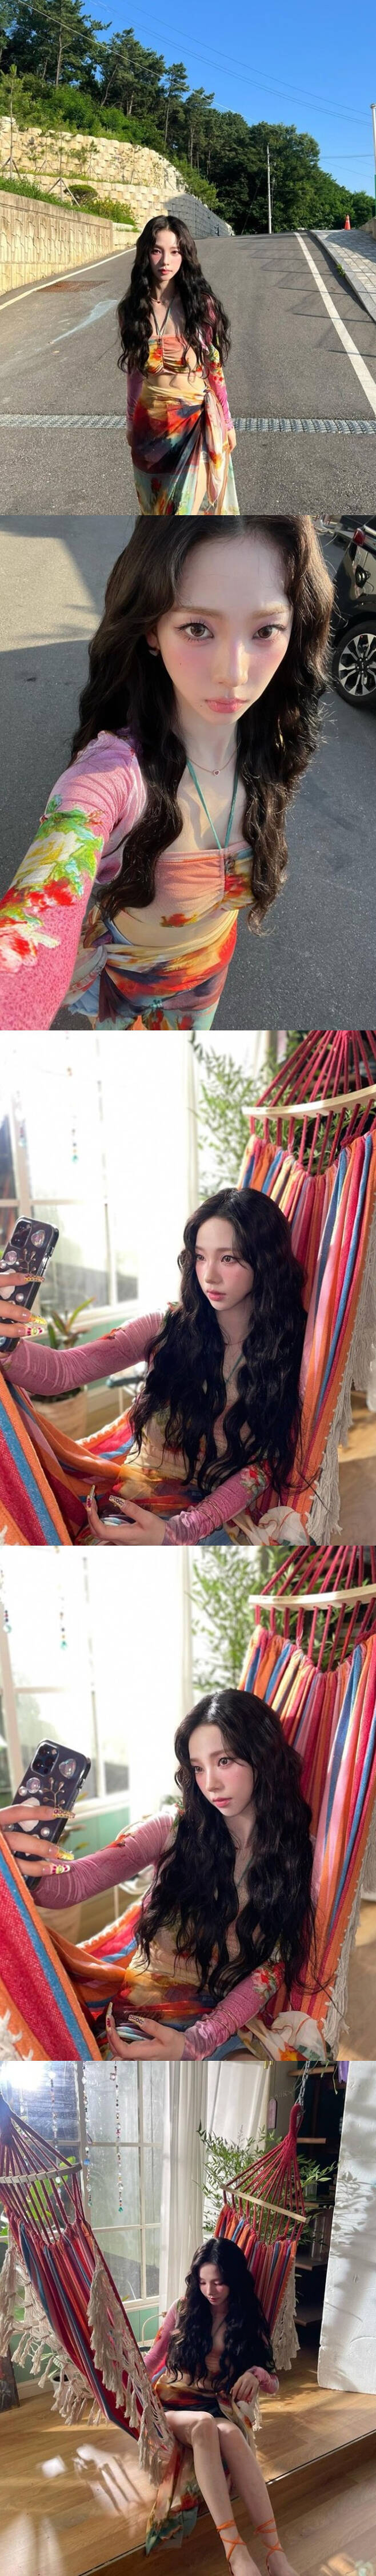 Karina posted several photos on her instagram with an article called Better things on the 21st.In the open photo, Karina is wearing a lovely color makeup on her long perm hair and is making a stern look, especially focusing on her unique color costume, which seems to be difficult for anyone to digest.The netizens responded that It is perfect to praise everything from beginning to end, Why is Ji Min so beautiful?, Karina is just crazy, and Are you a goddess?Meanwhile, Aespa attended the United States of Americas popular outdoor music festival Outside Lands Music & Arts Festival (OSL) on the 11th for the first time as a K-pop group.Aespa also has a world tour in 14 cities across the United States of America, South America and Europe, starting with LA on the 13th.